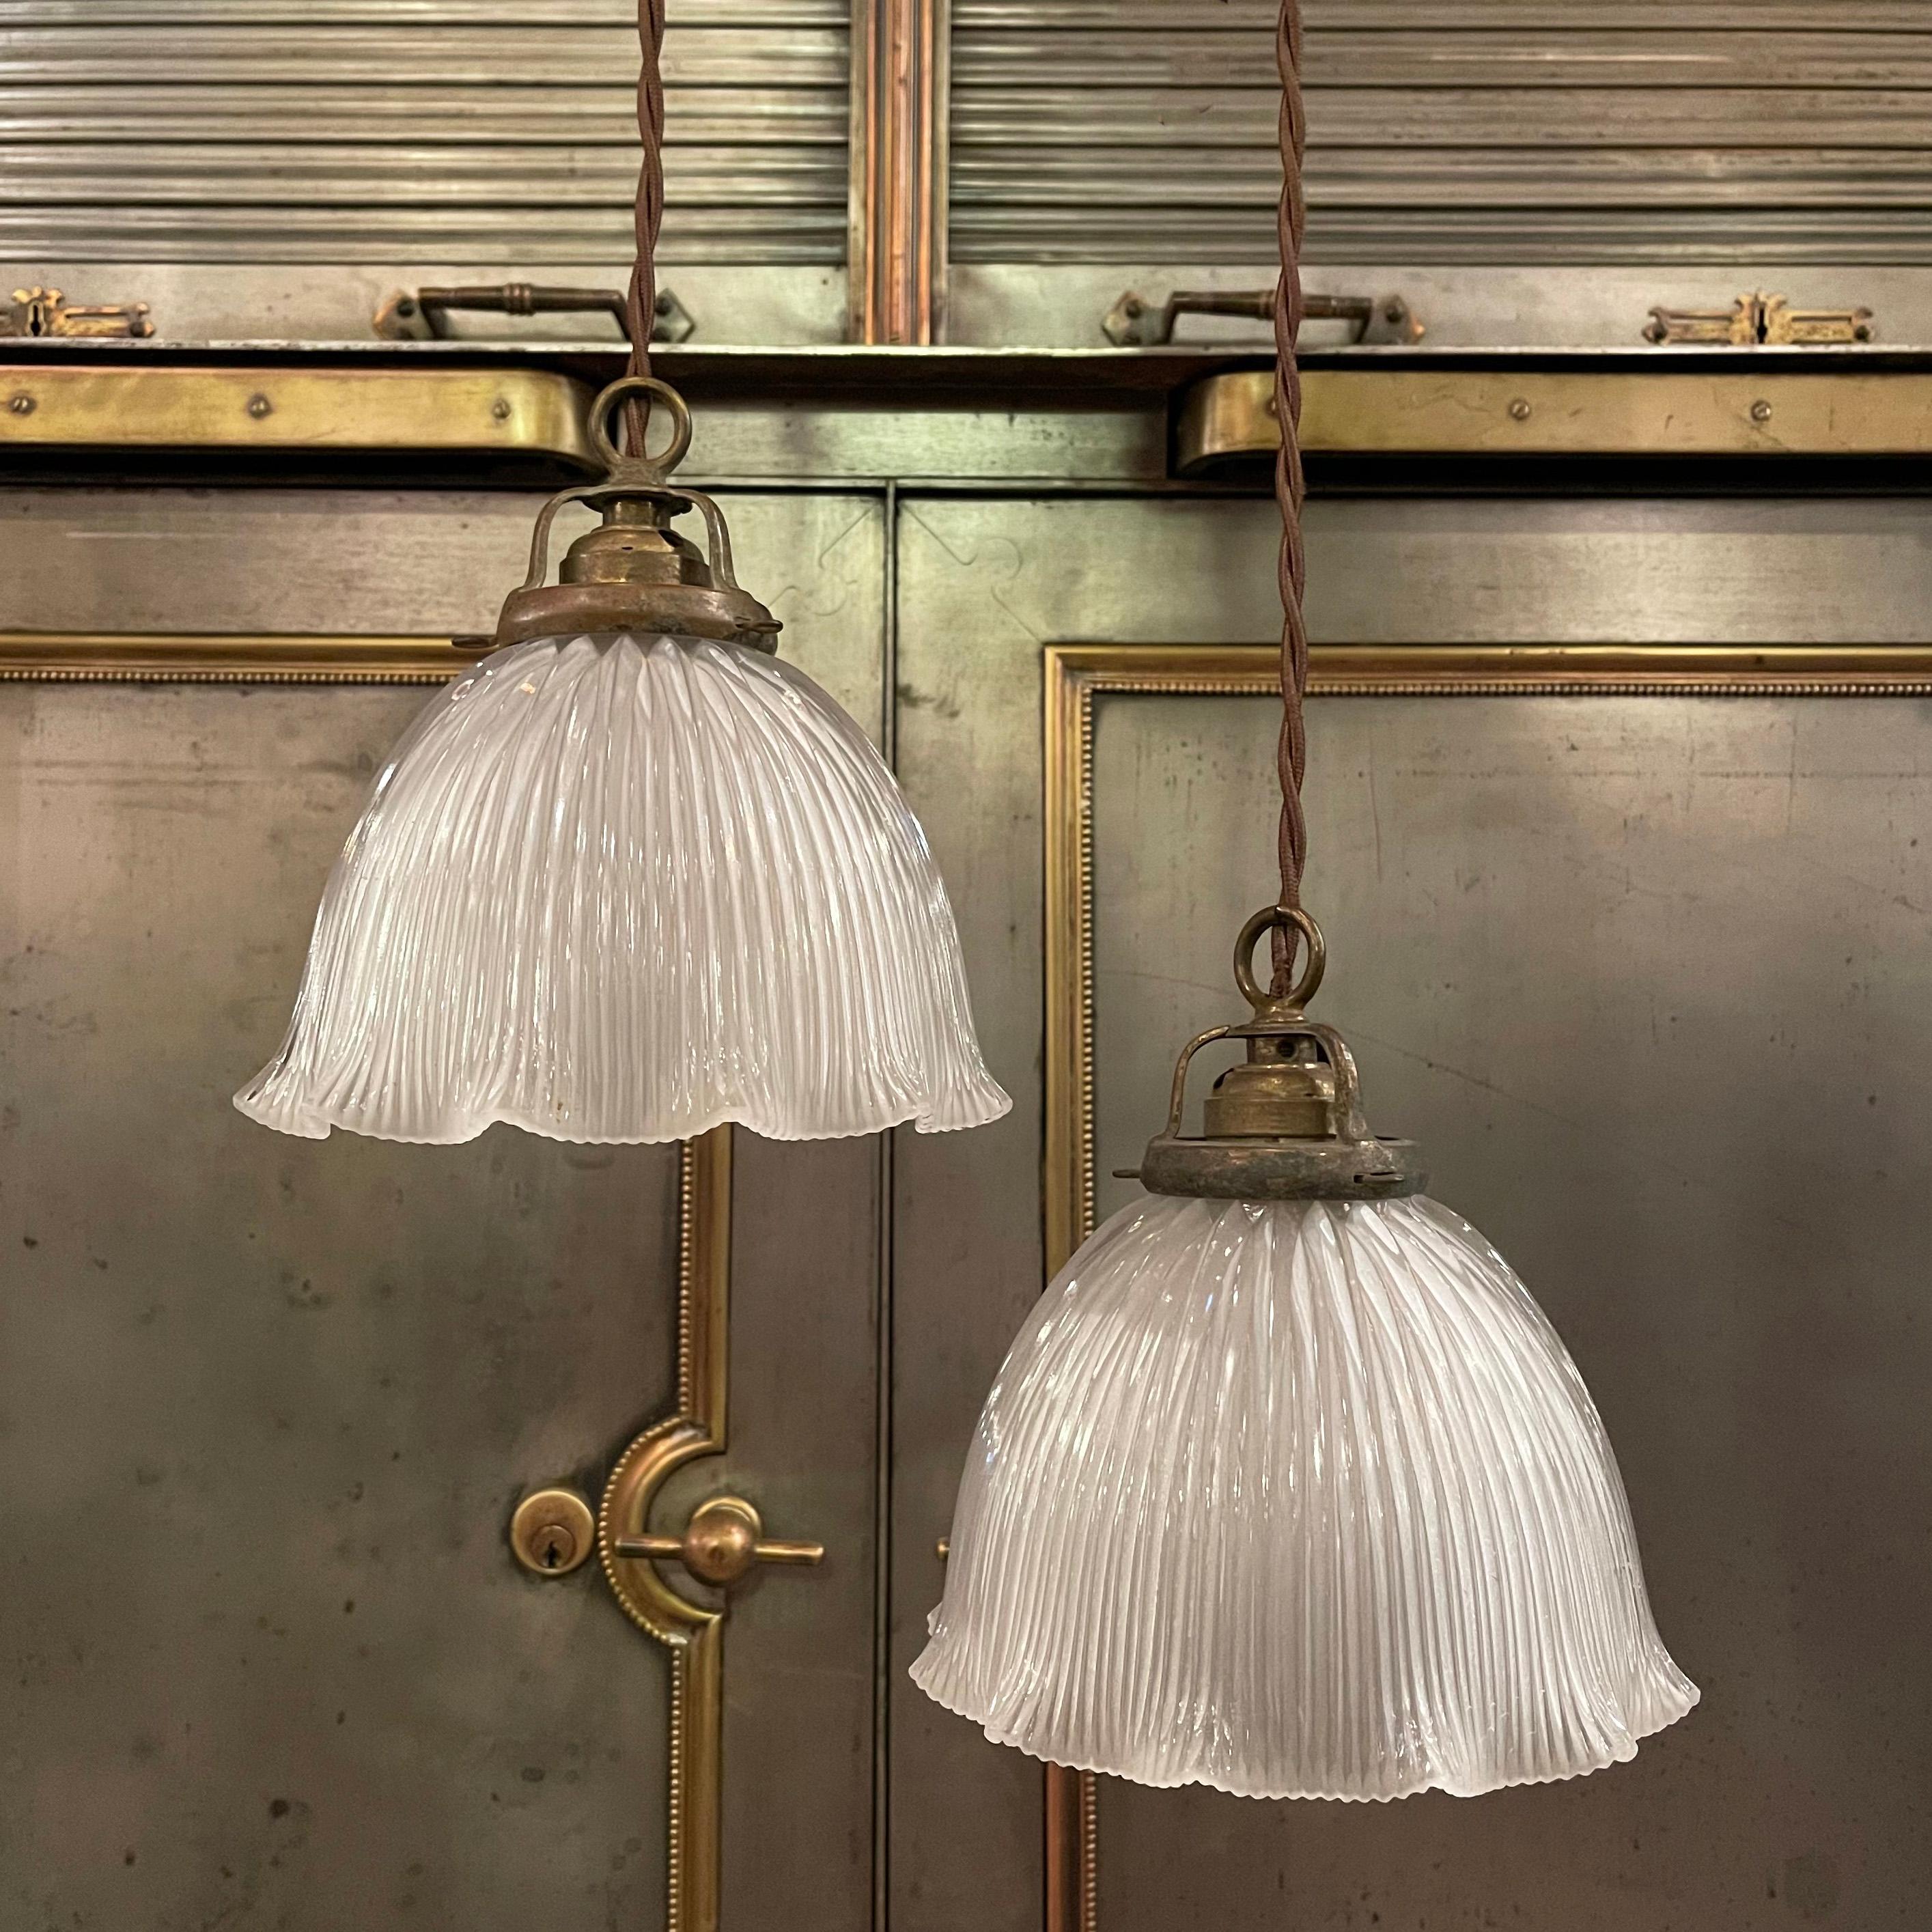 Early 20th century pendant light with a ruffled edge, cut glass dome shade and brass hardware is newly wired with 48 inches of brown braided cloth cord. Three pendants are available, priced individually.